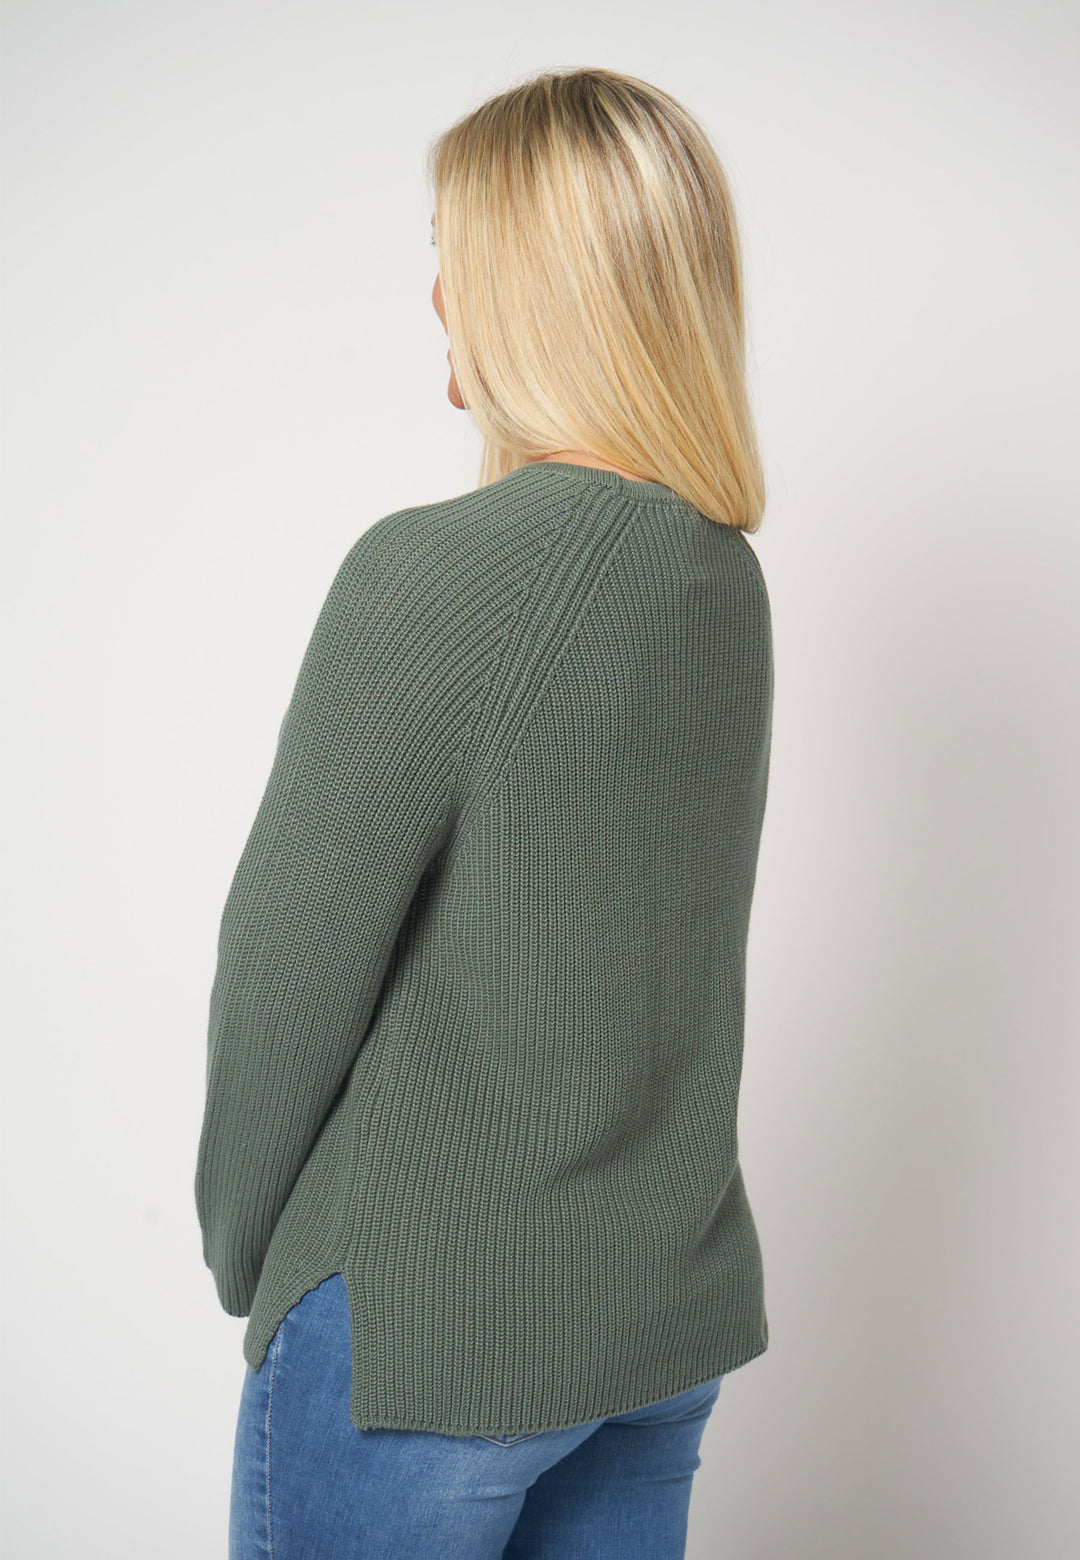 Lind Malene Knit Pullover 044 Army